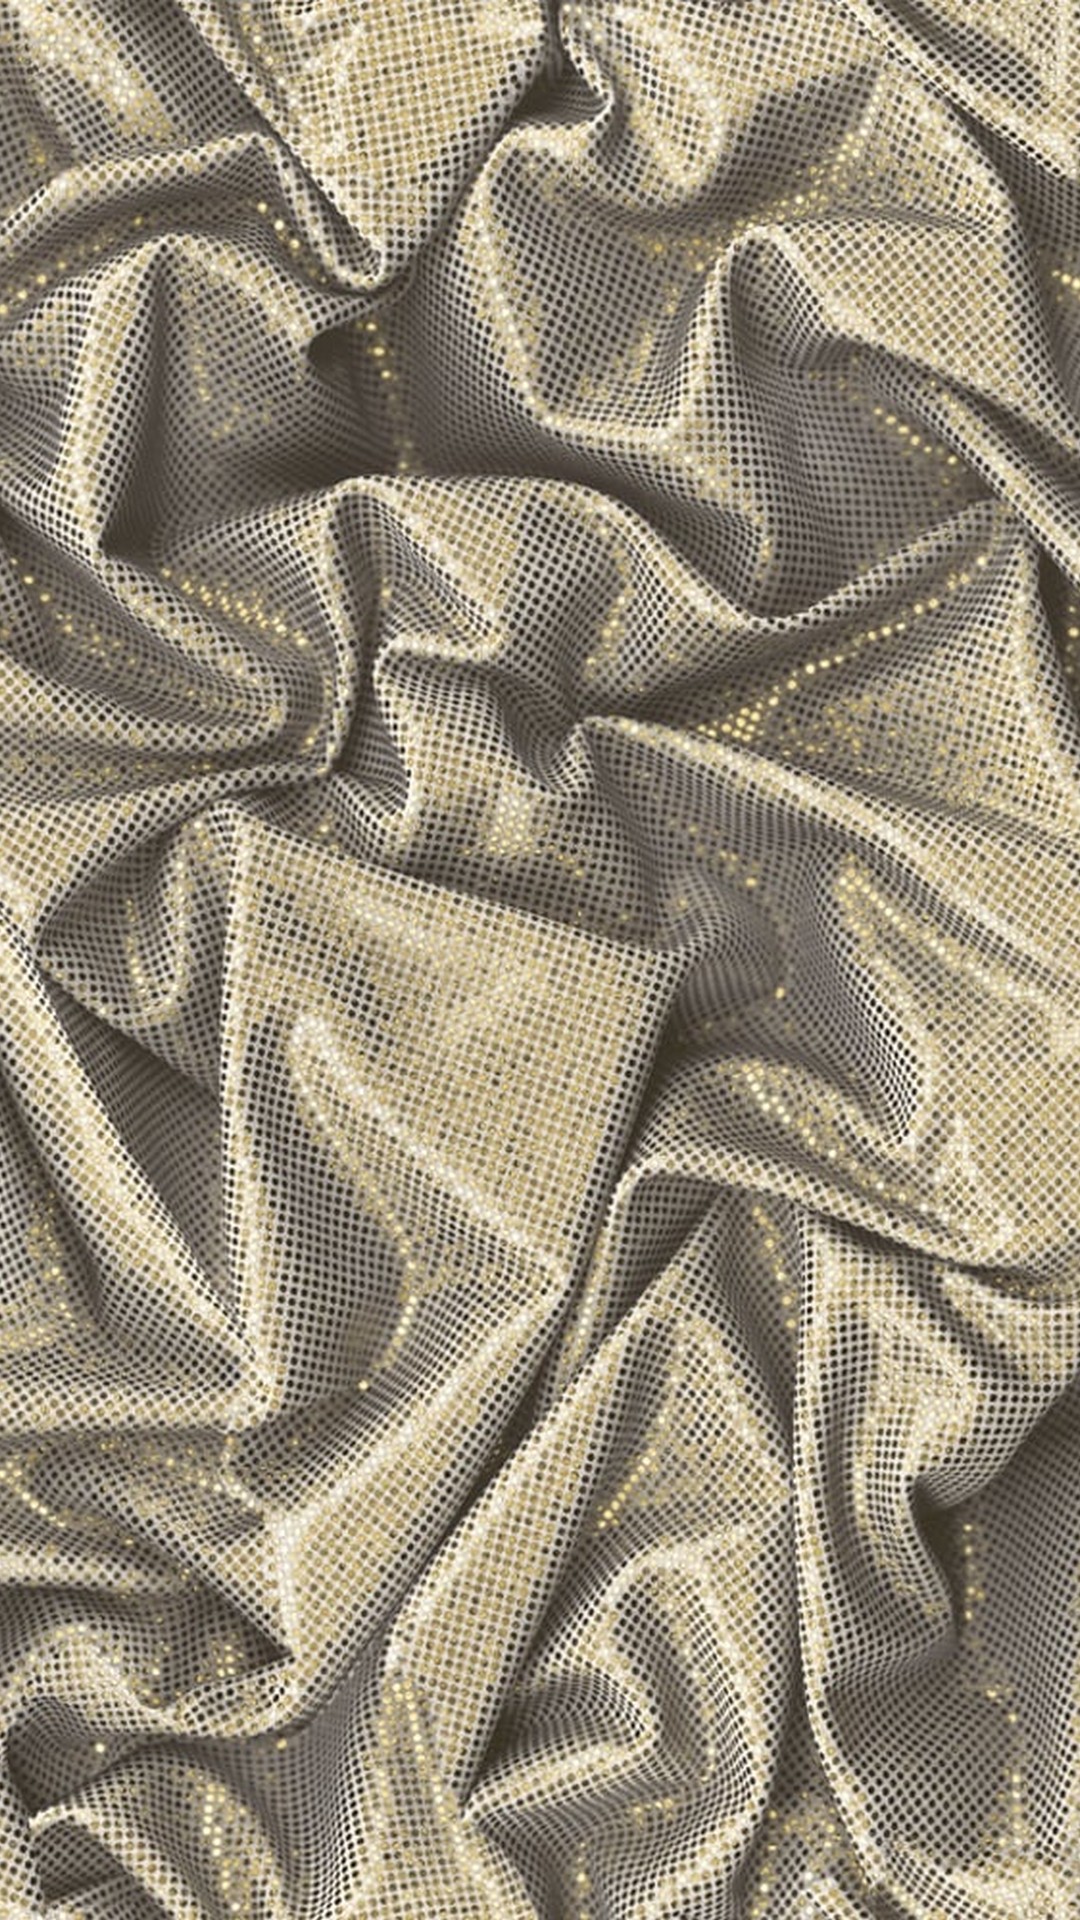 Metallic Gold Backgrounds For Android with HD resolution 1080x1920